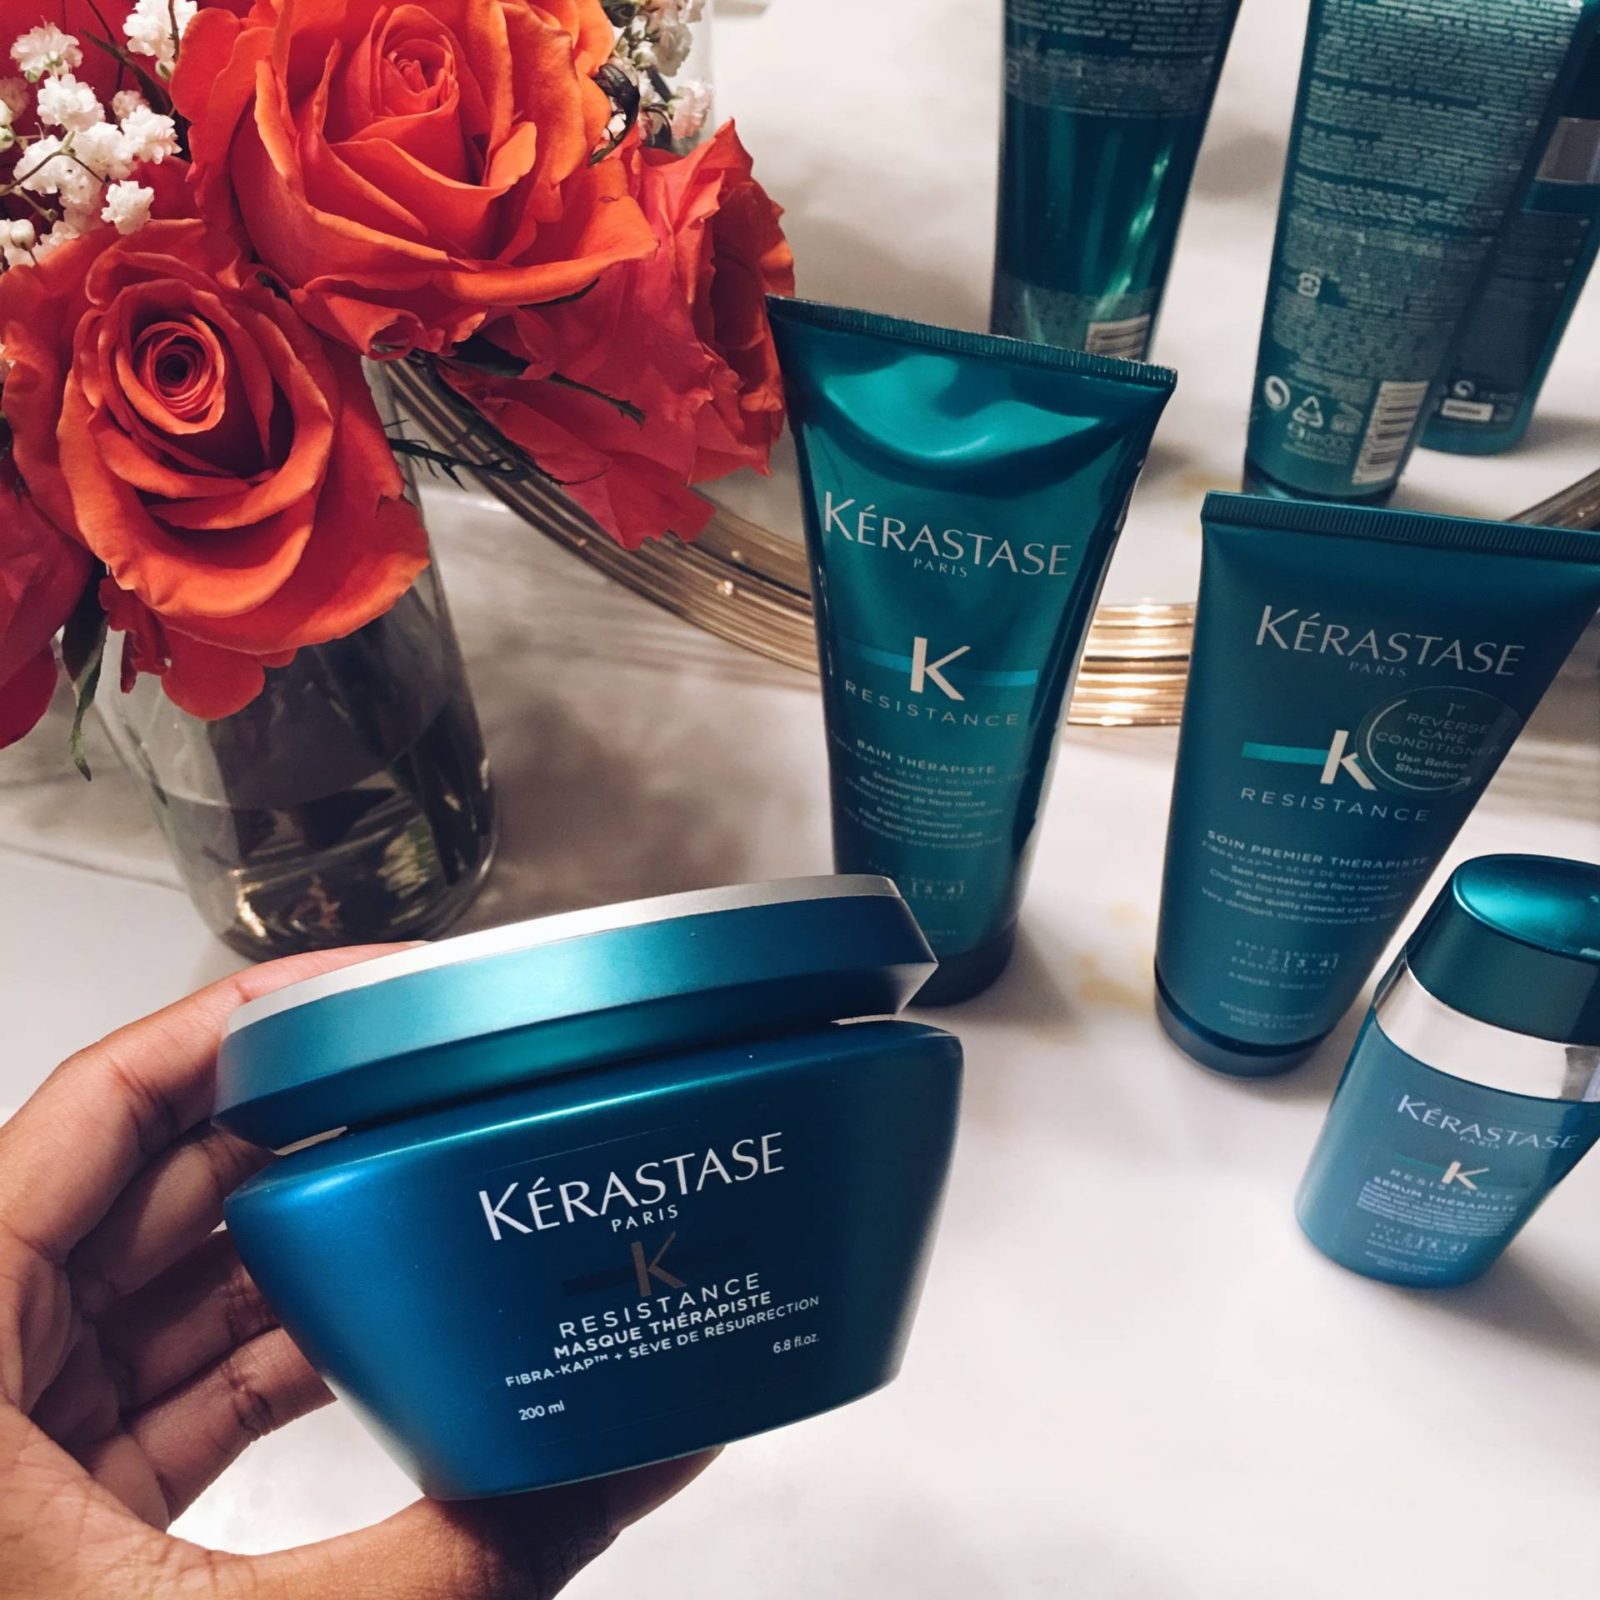 Kerastase Resistance Review for Chemically Damaged Hair-Le Fab Chic